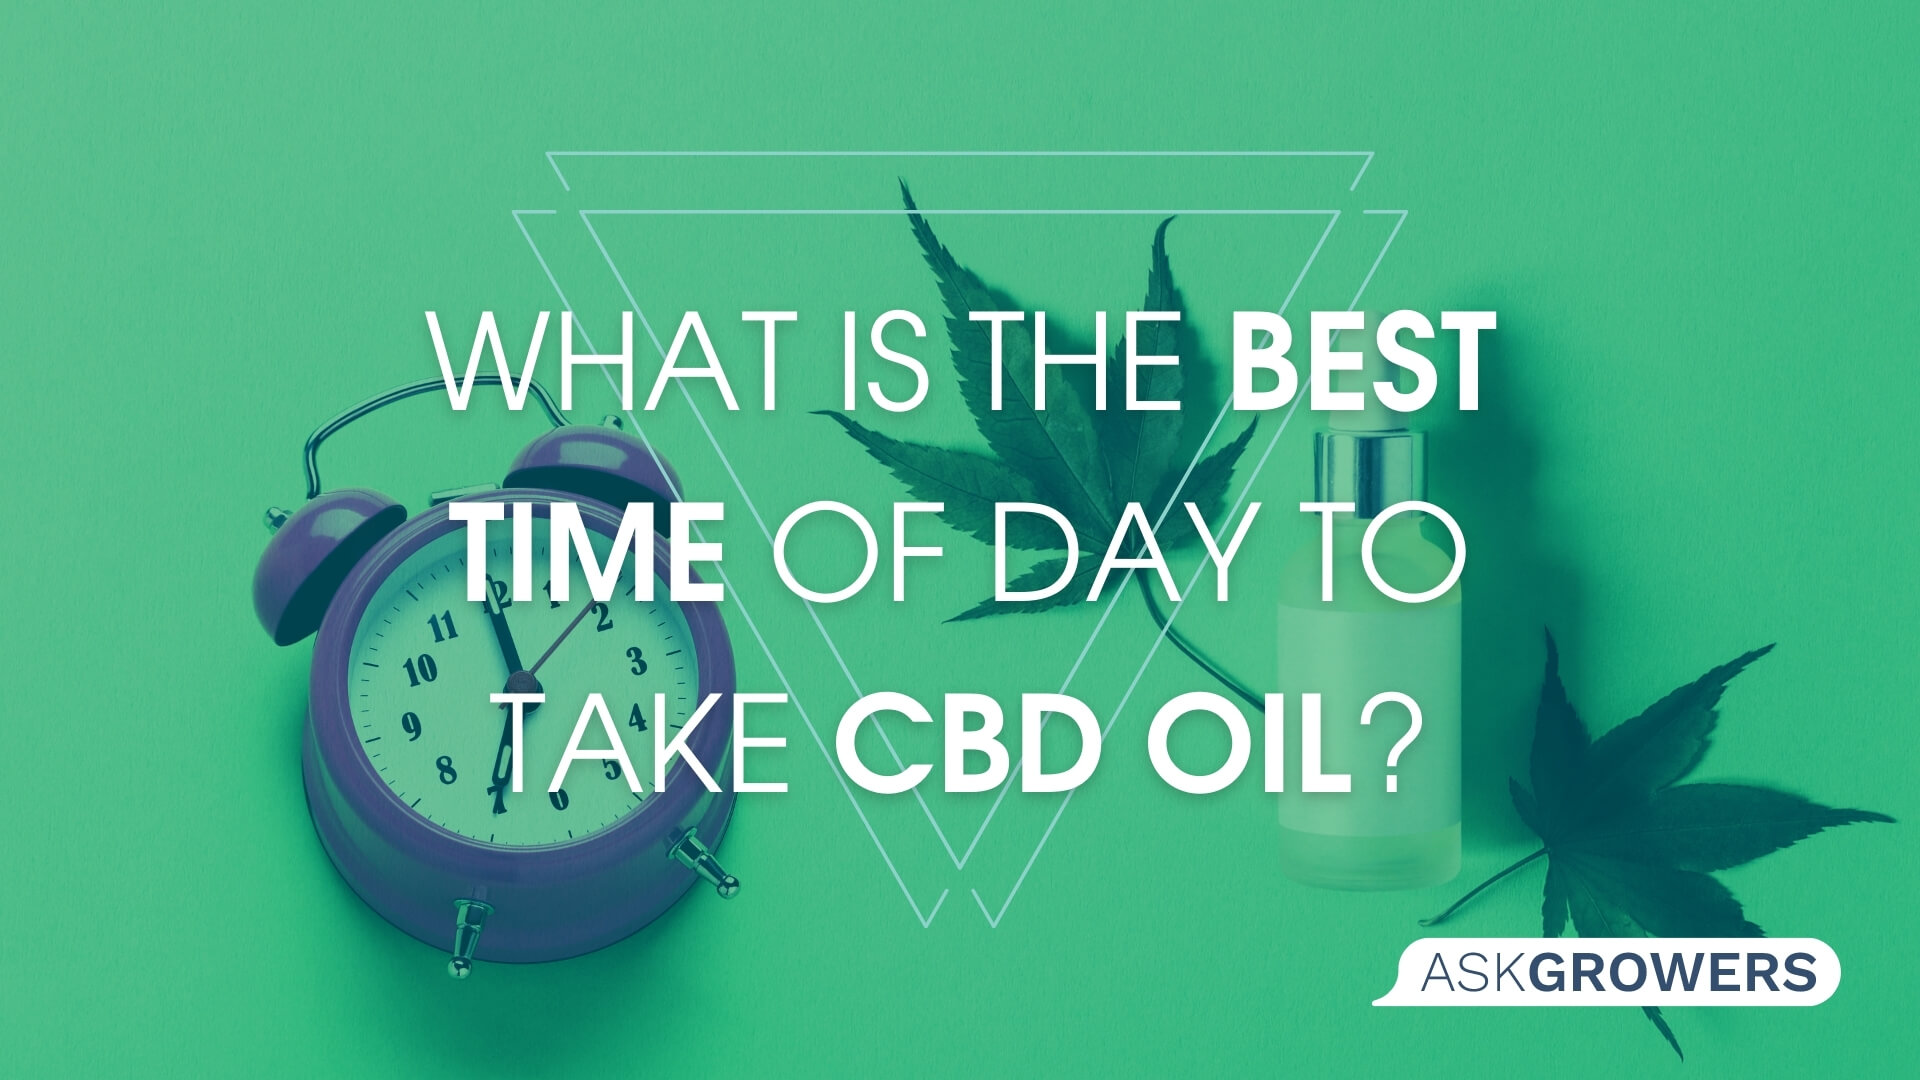 What Is the Best Time of Day to Take CBD Oil?